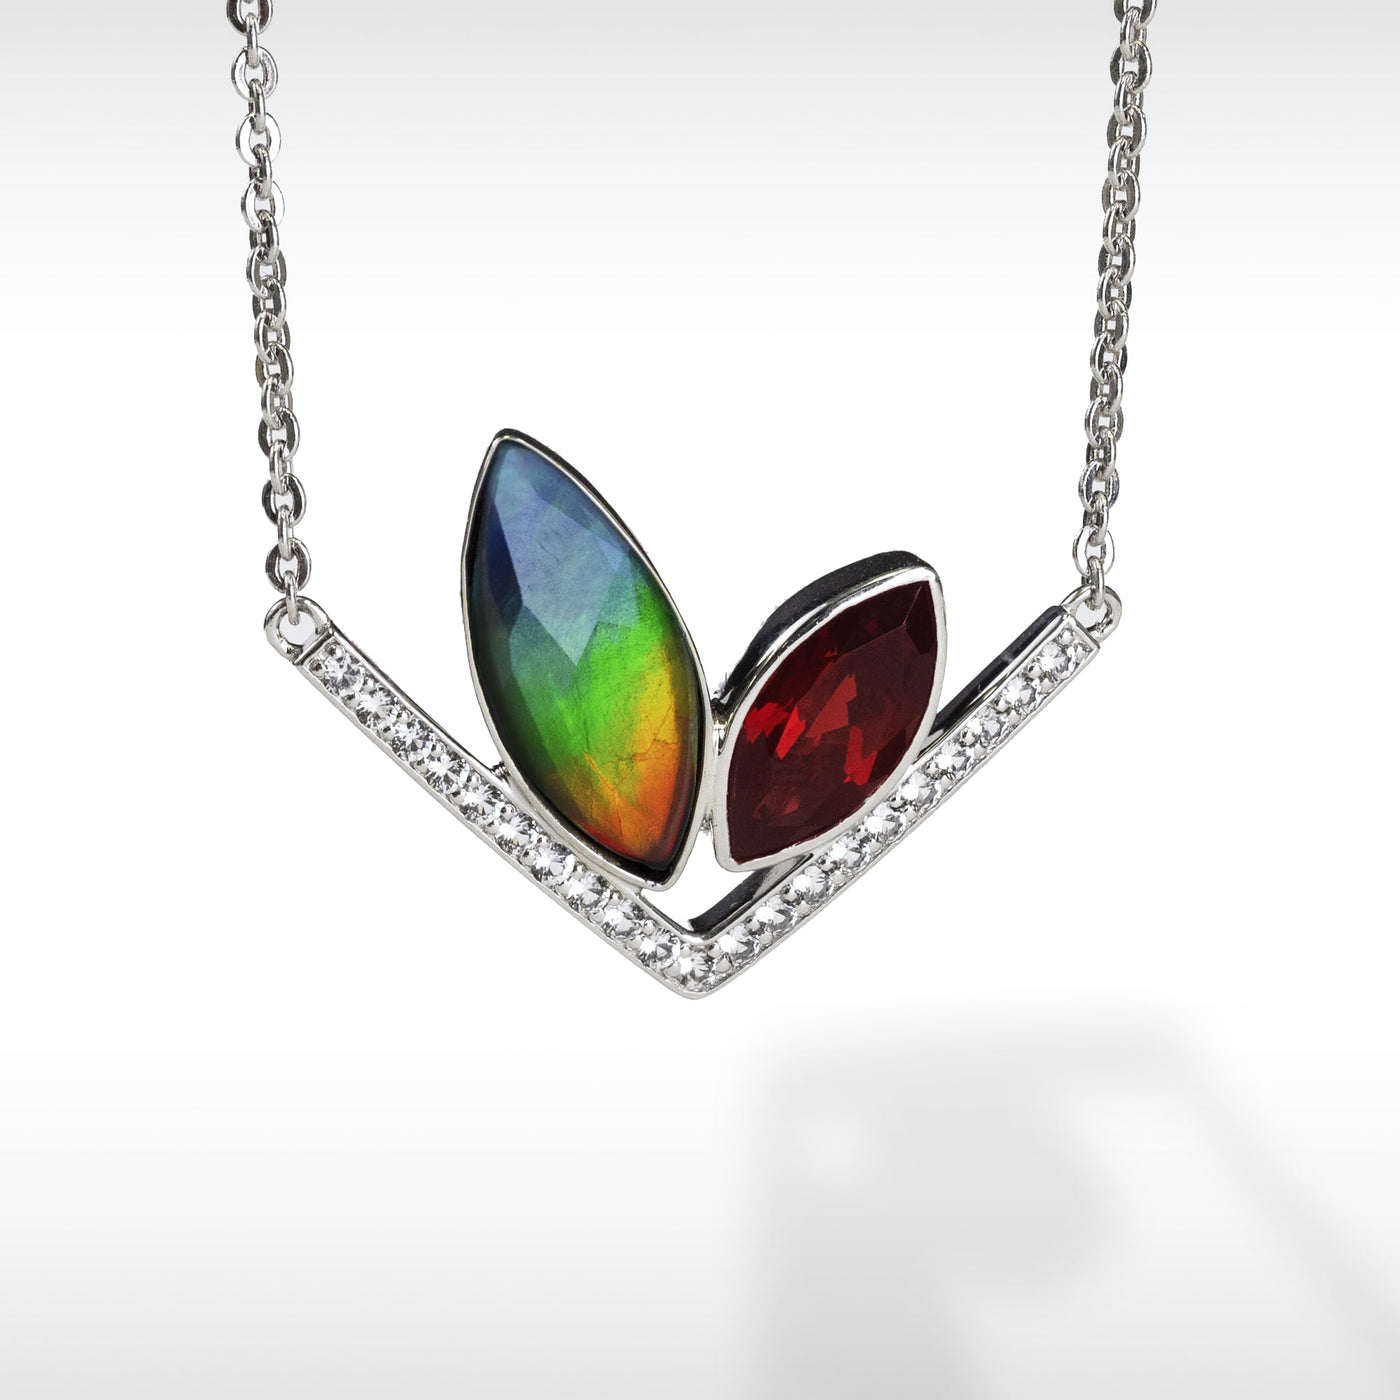 Rabbit ammolite pendant and ring set in sterling silver